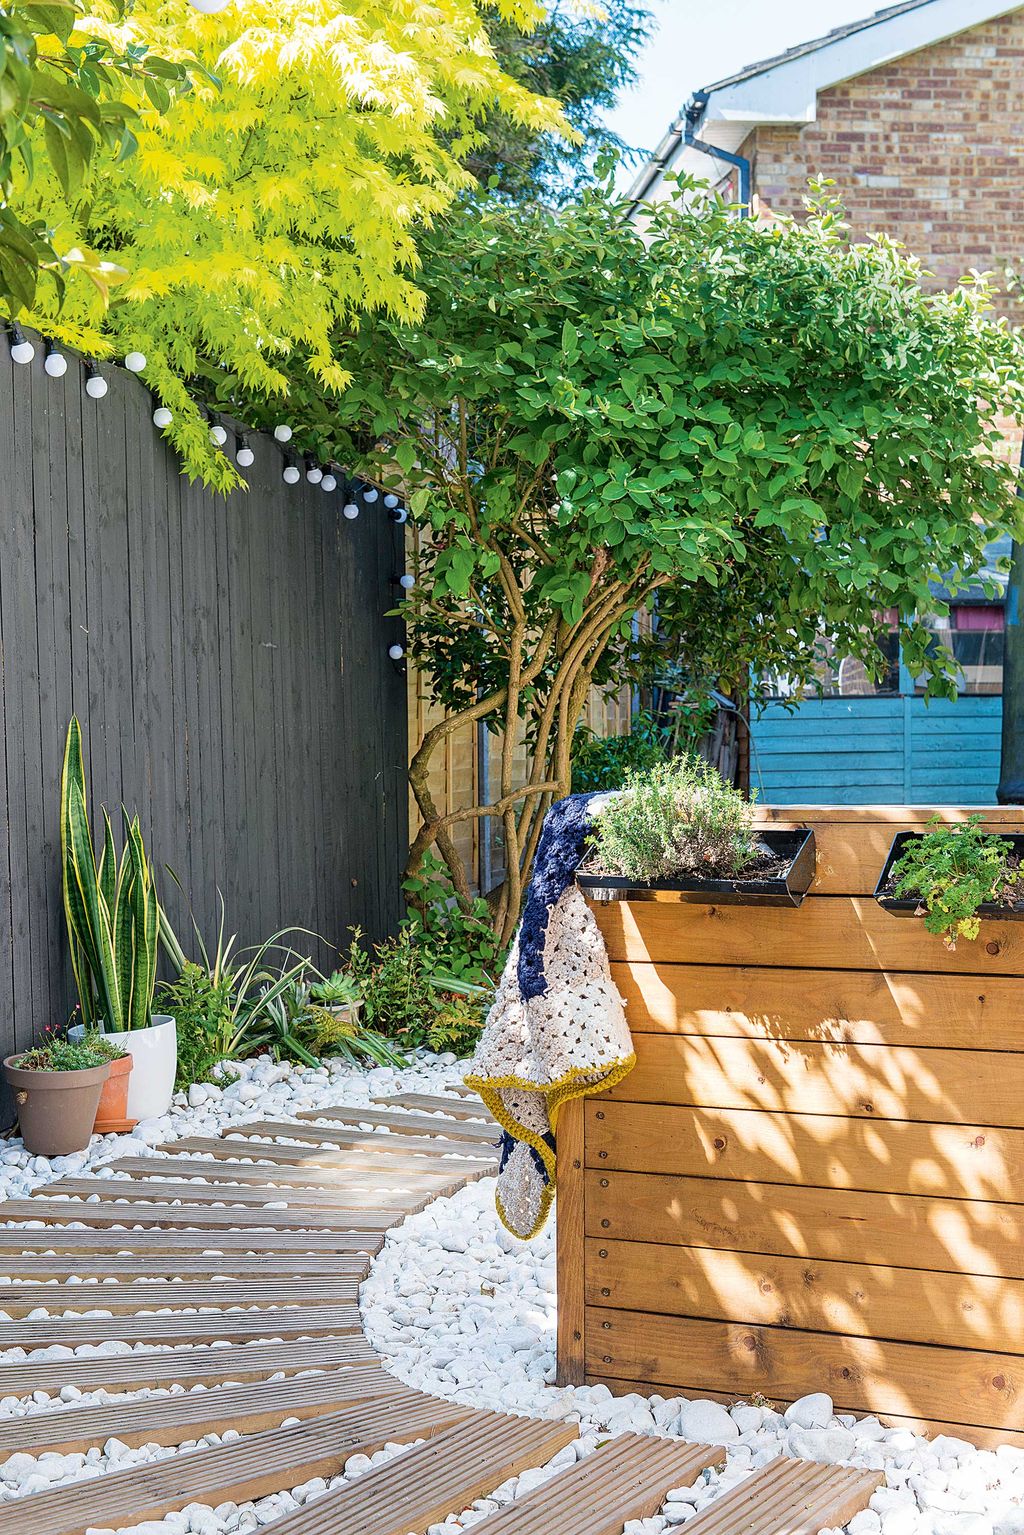 Privacy fence ideas: 10 ways to surround your yard to make it more